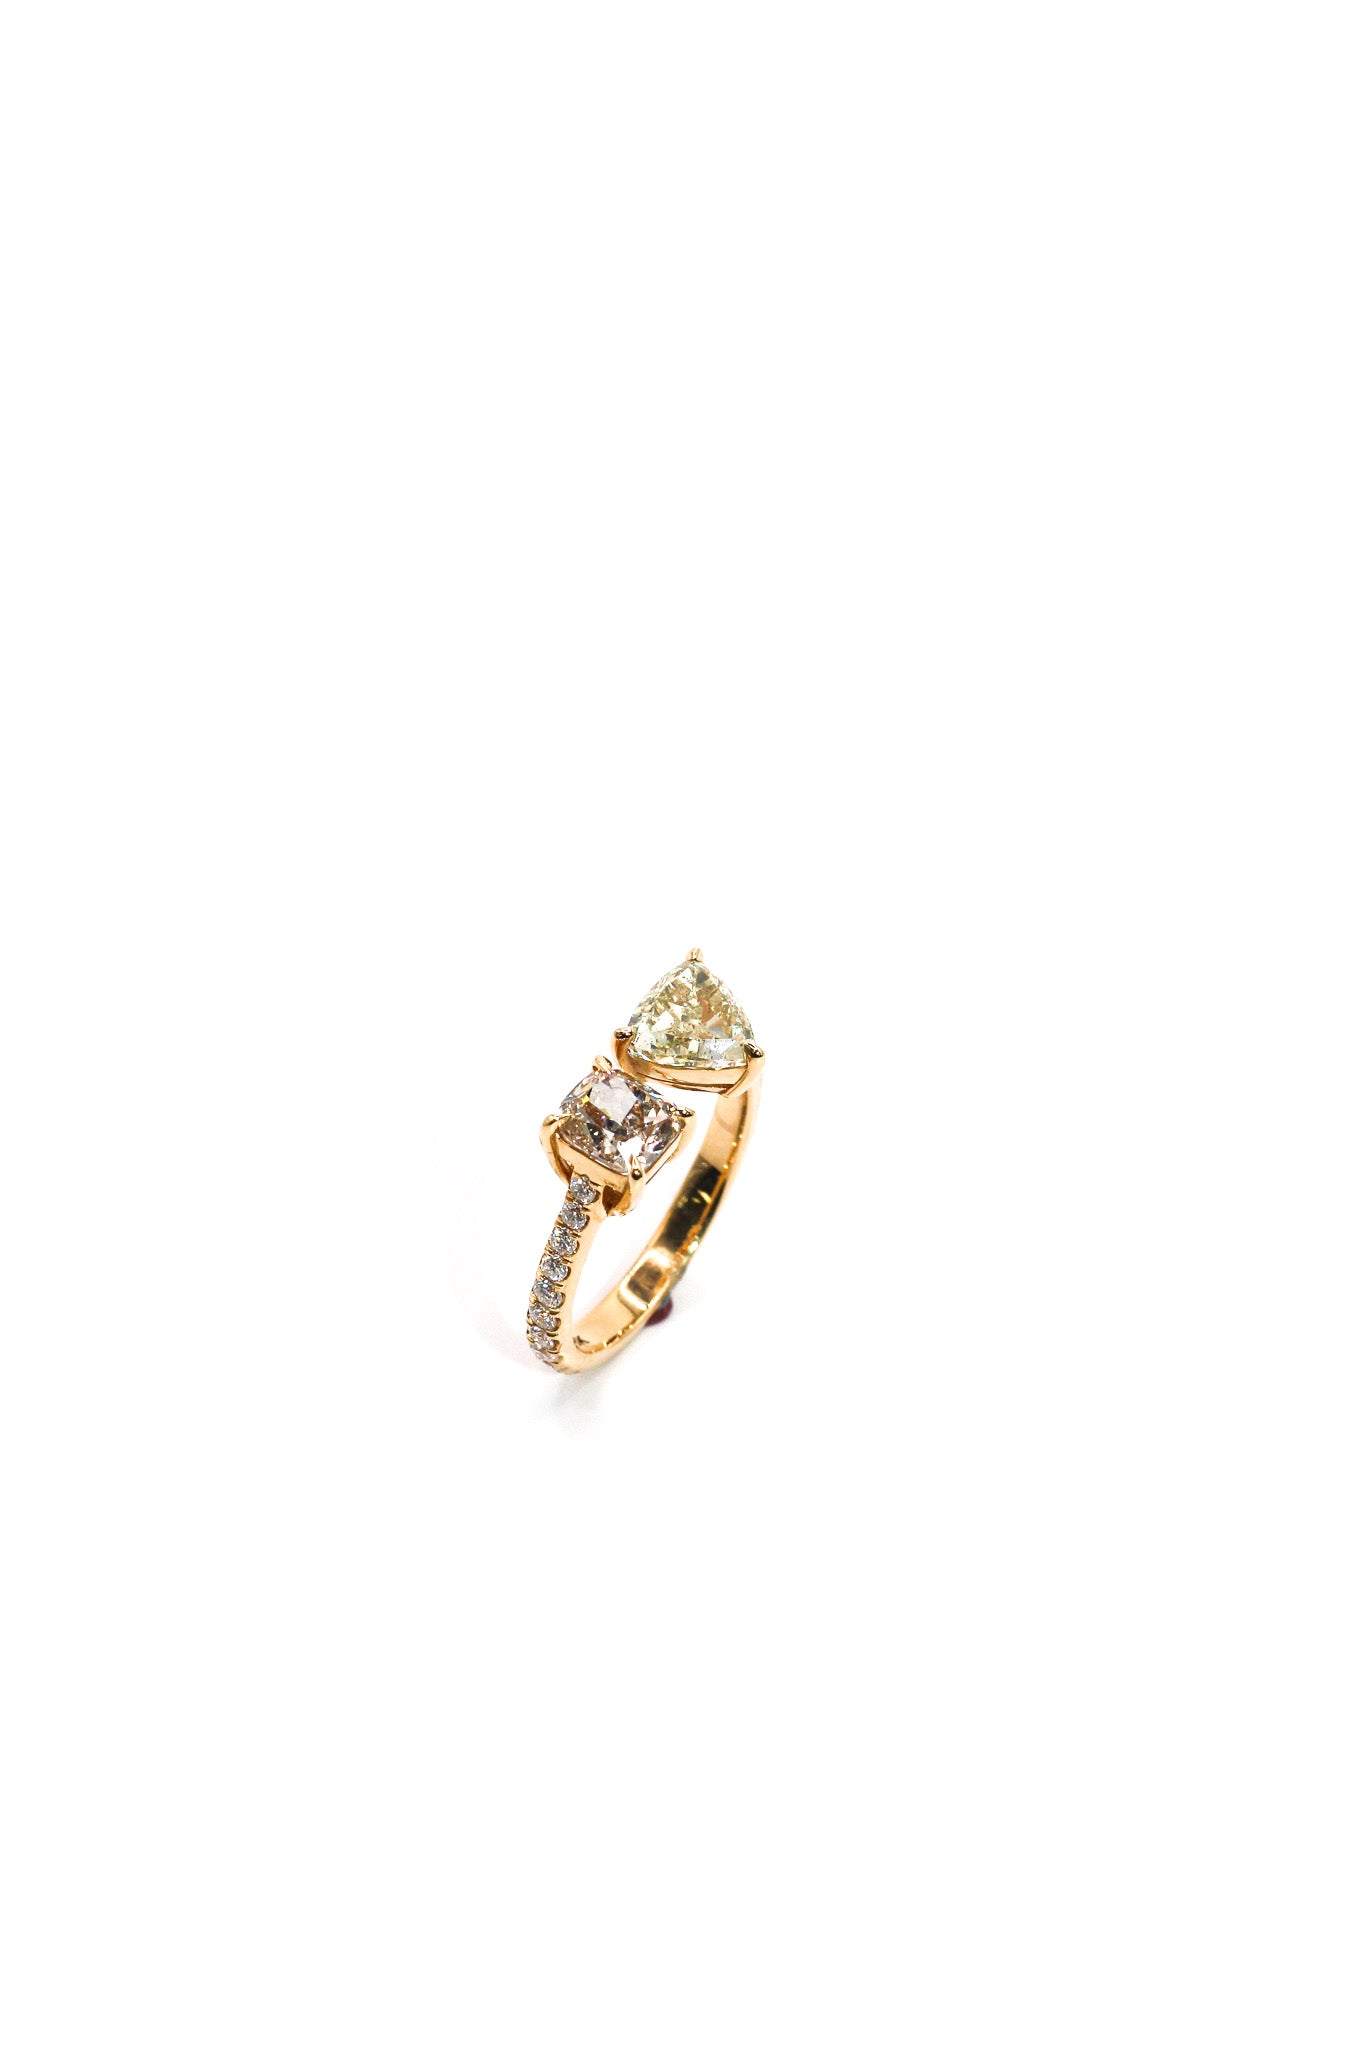 18KT Yellow Gold Engagement Ring with Cushion and Trillion Cut (Round Diamonds on Band)